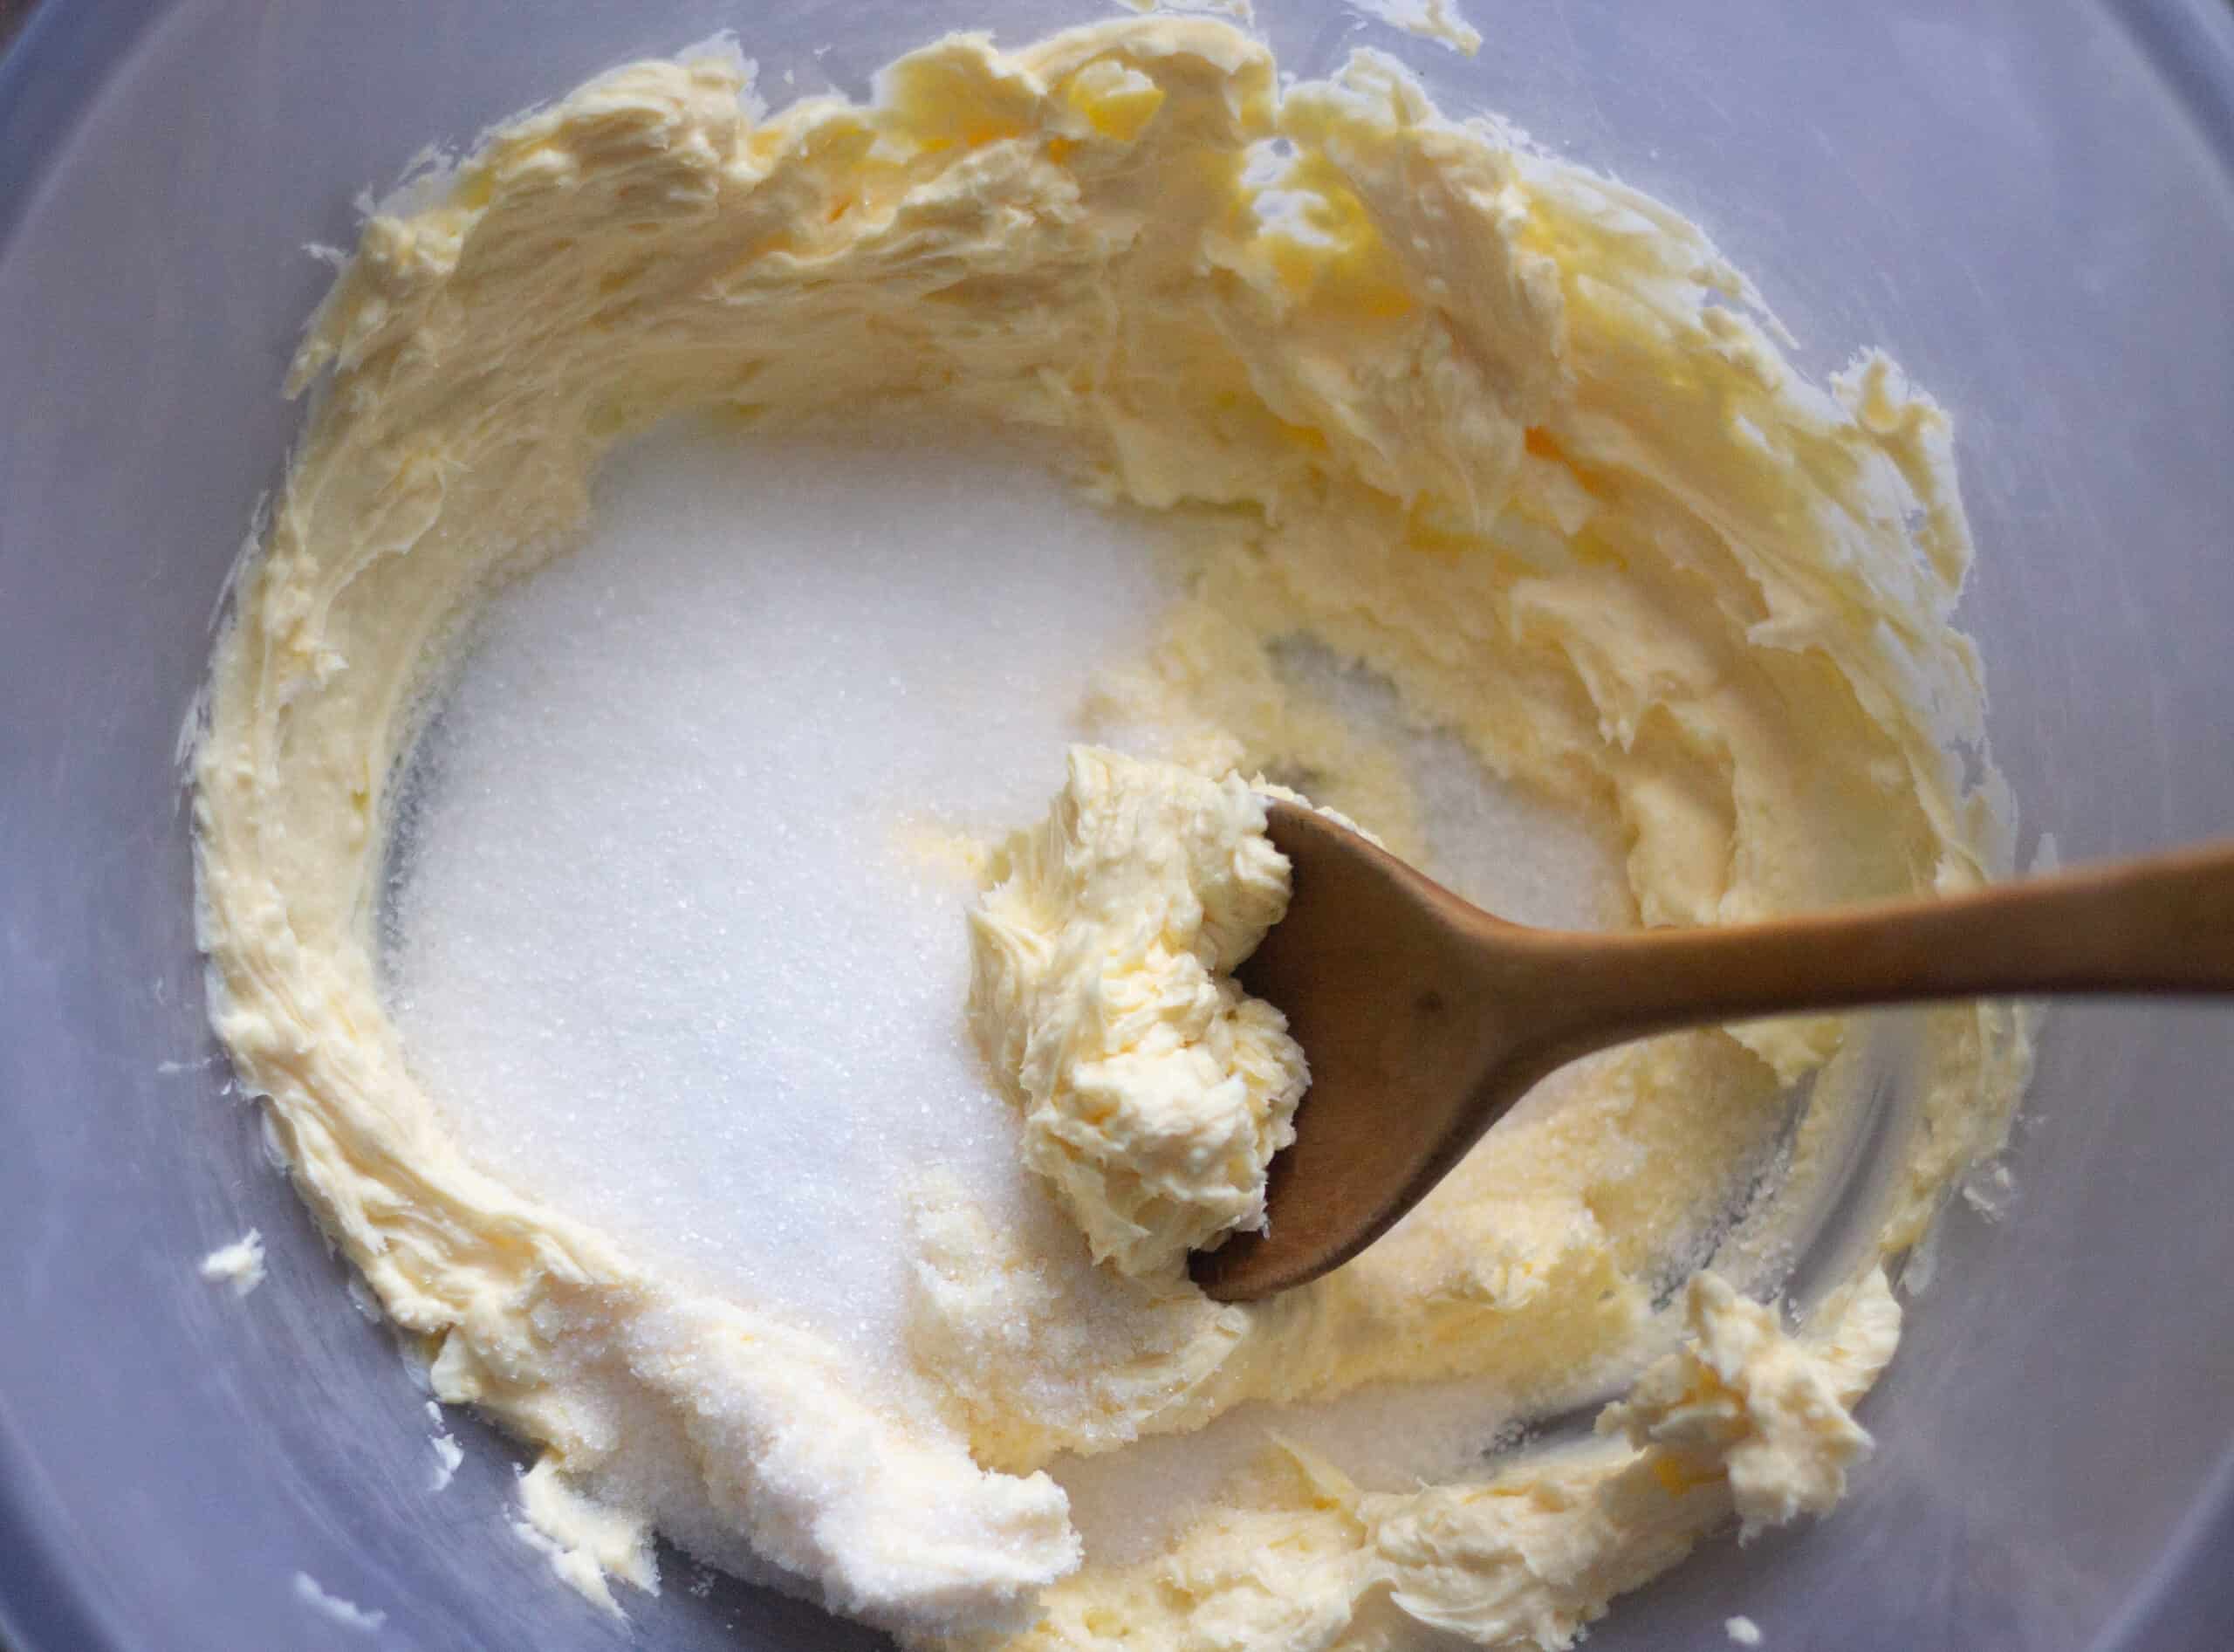 Creaming butter and sugar together